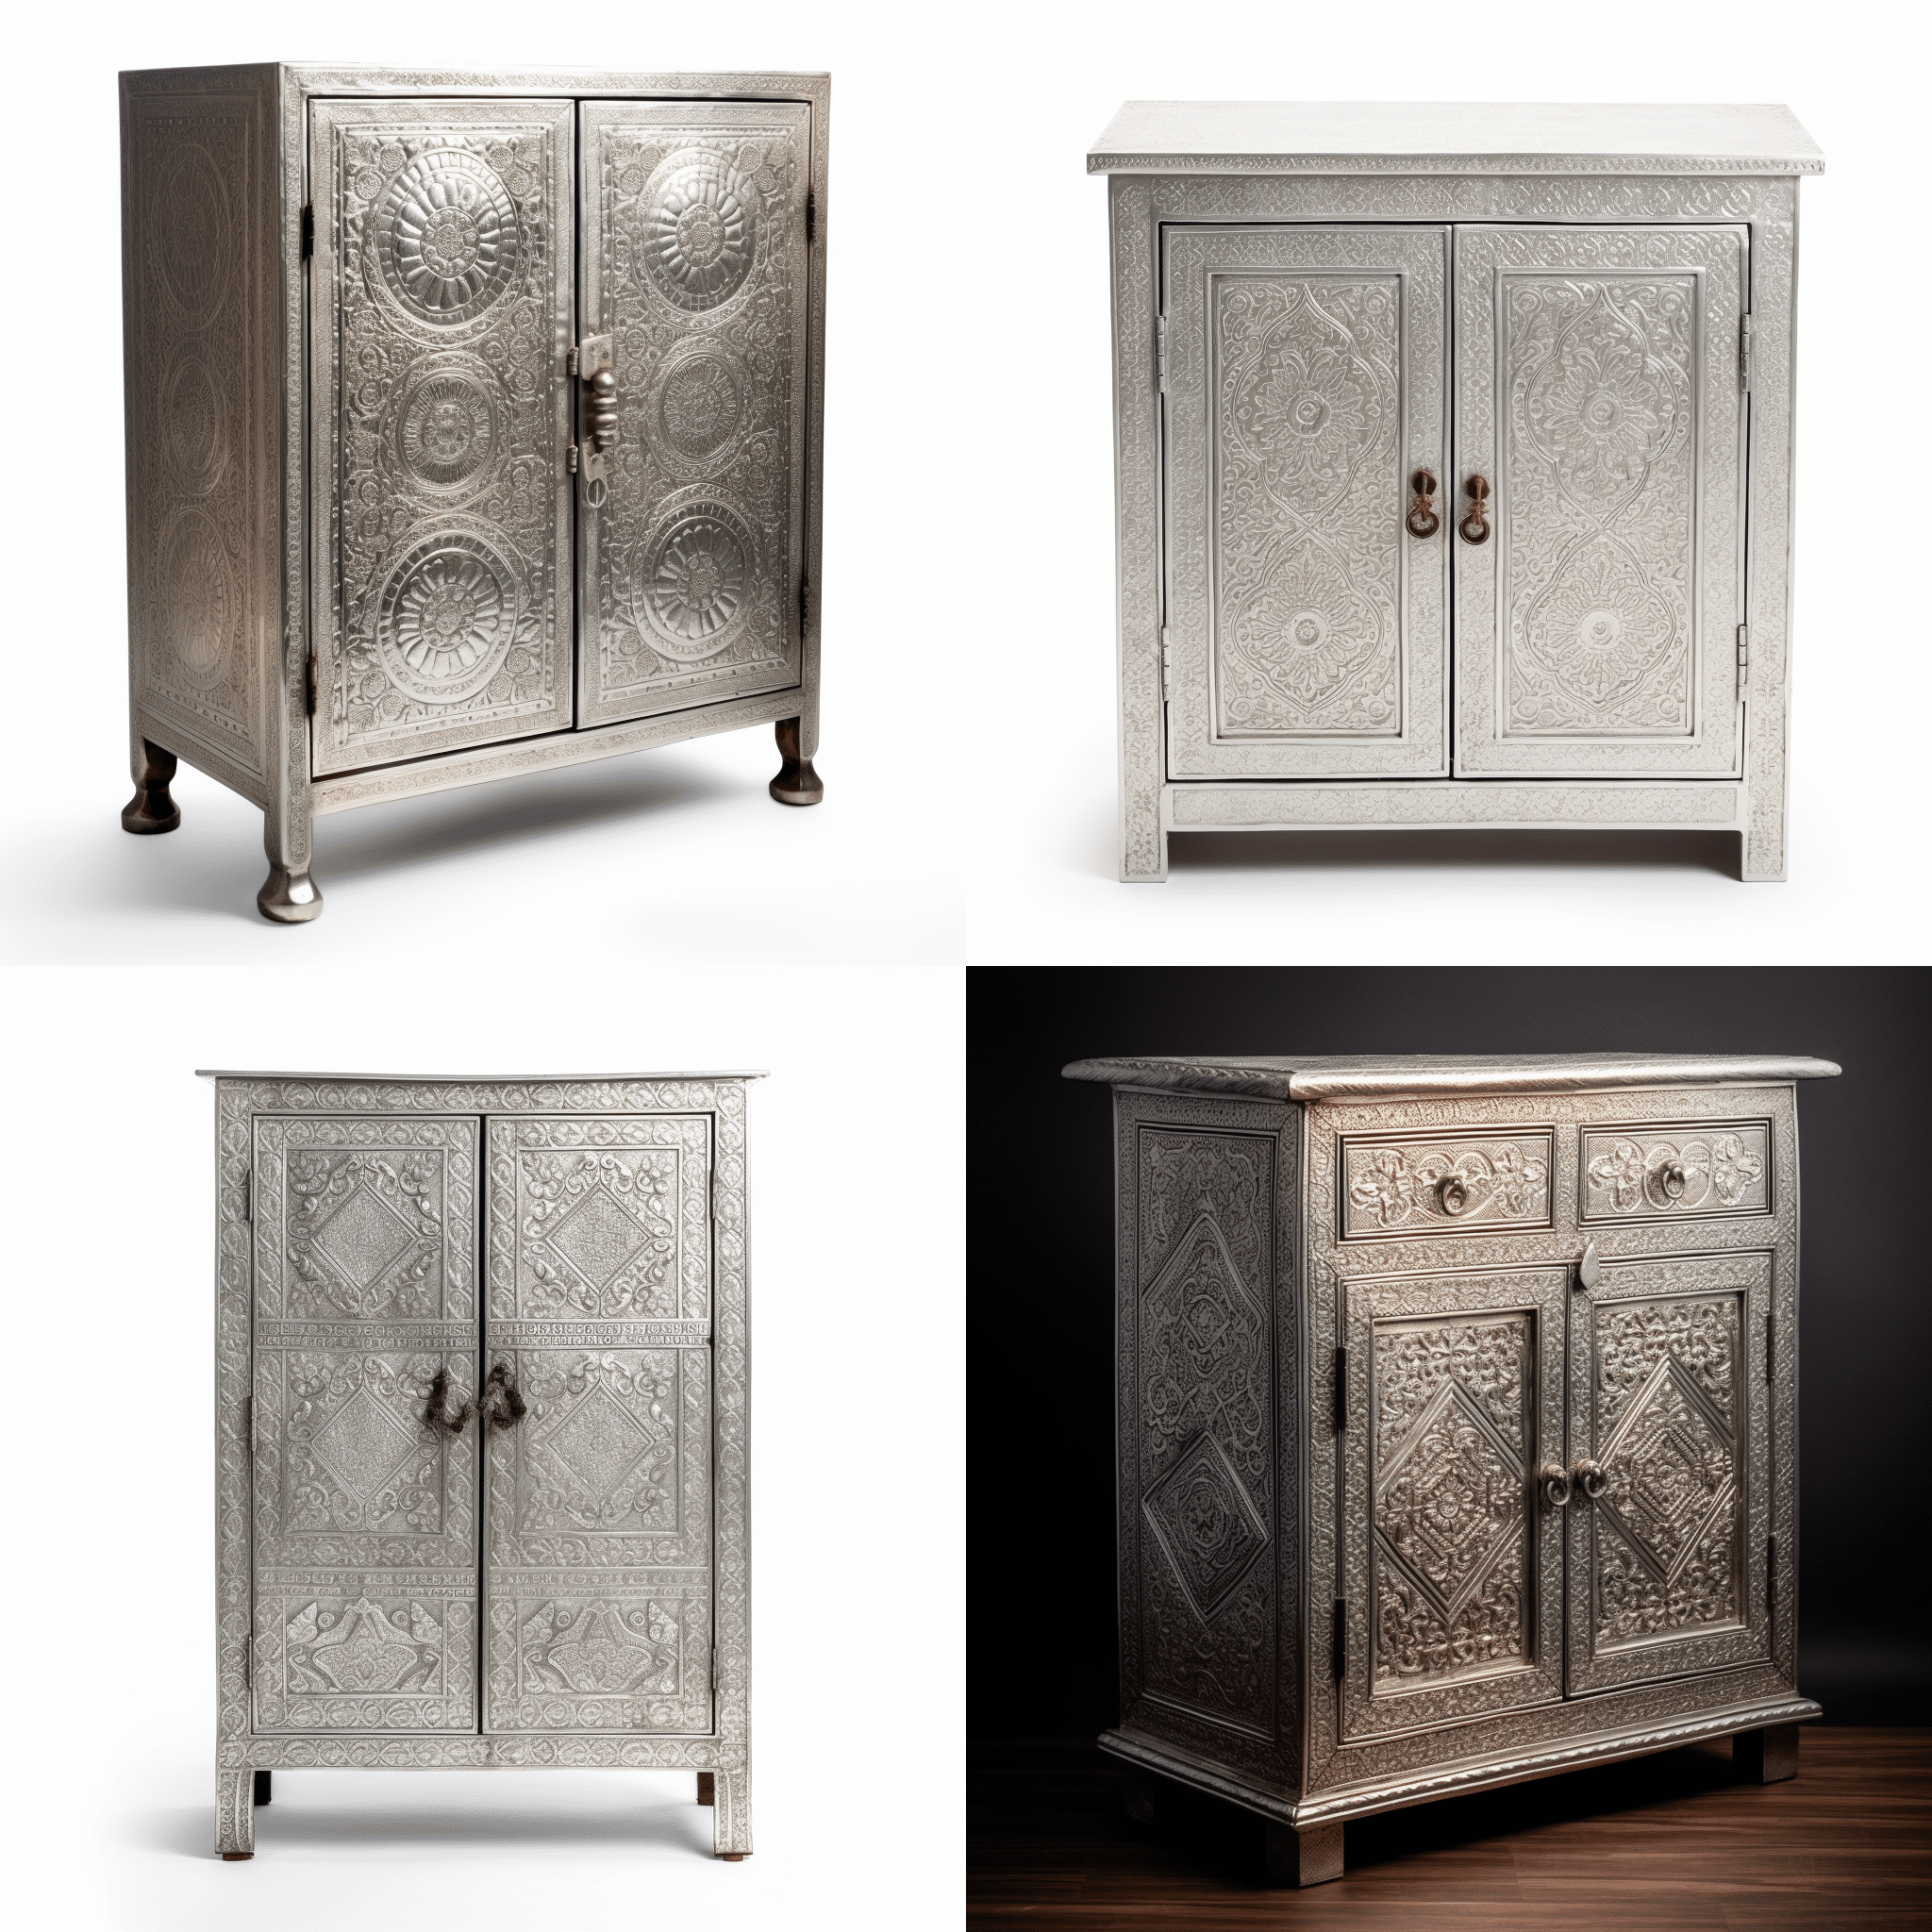 The new, elegant guise of metal furniture - Mohd